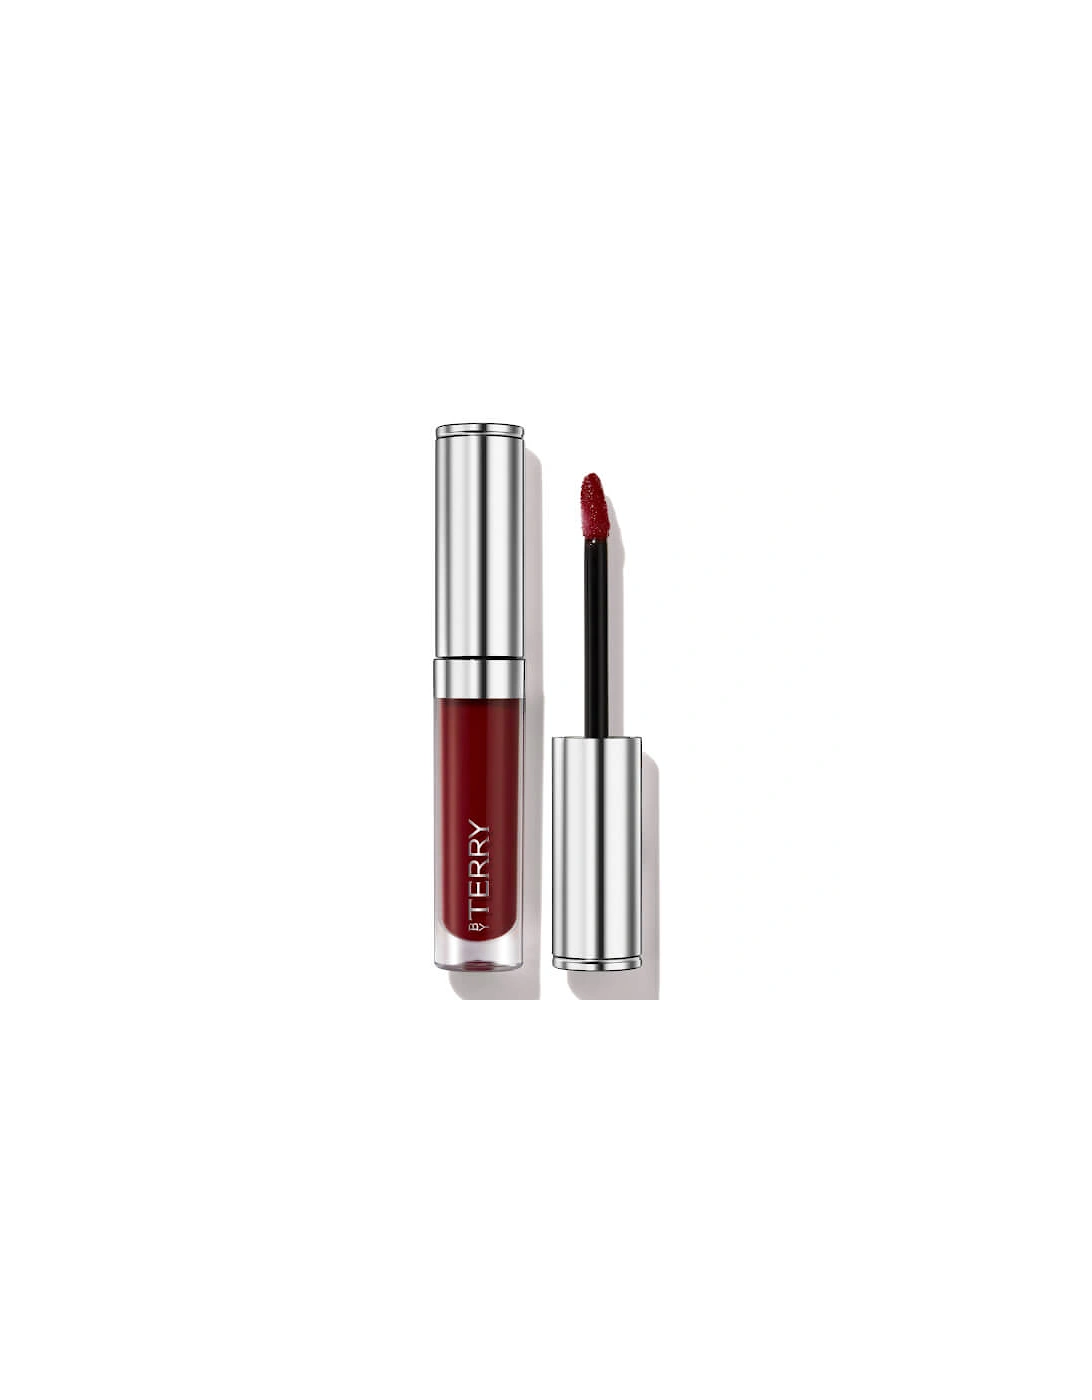 By Terry Baume de Rose Tinted Lip Care: 1. Cherry-Chérie, 2 of 1